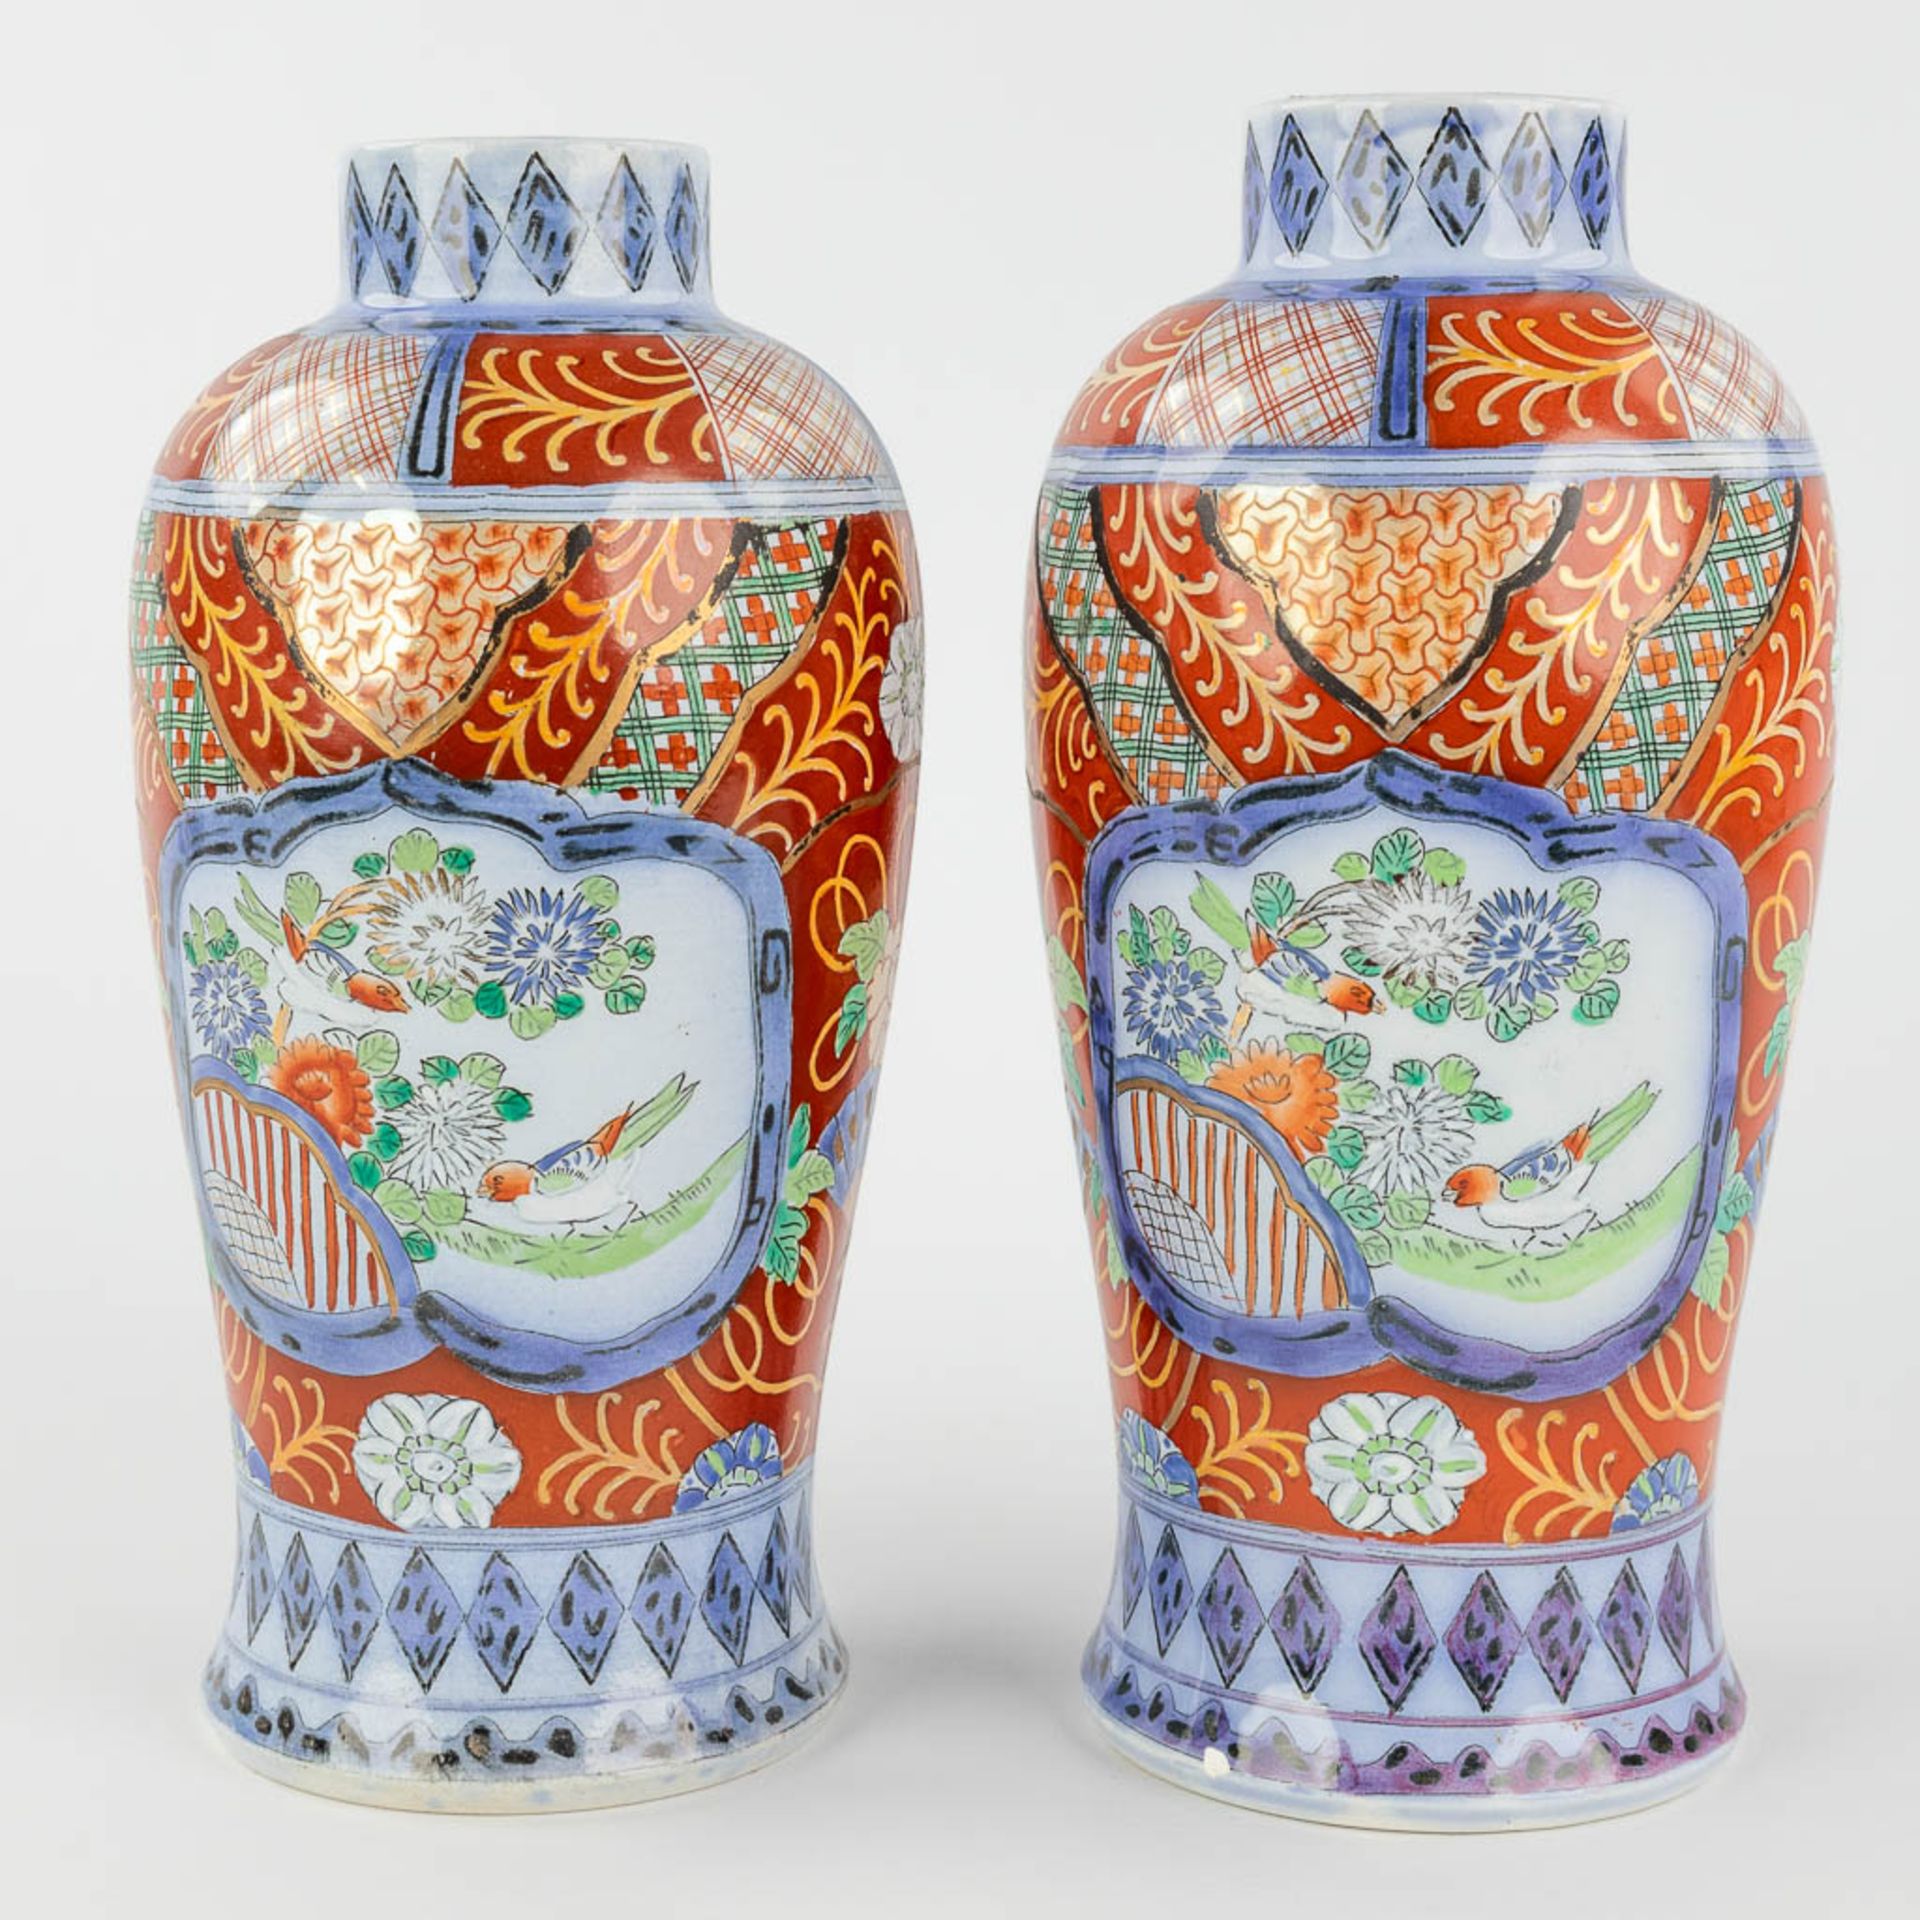 An assembled collection of Japanese Imari and Kutani porcelain. 19th/20th century. (H: 35 x D: 19 cm - Image 4 of 22